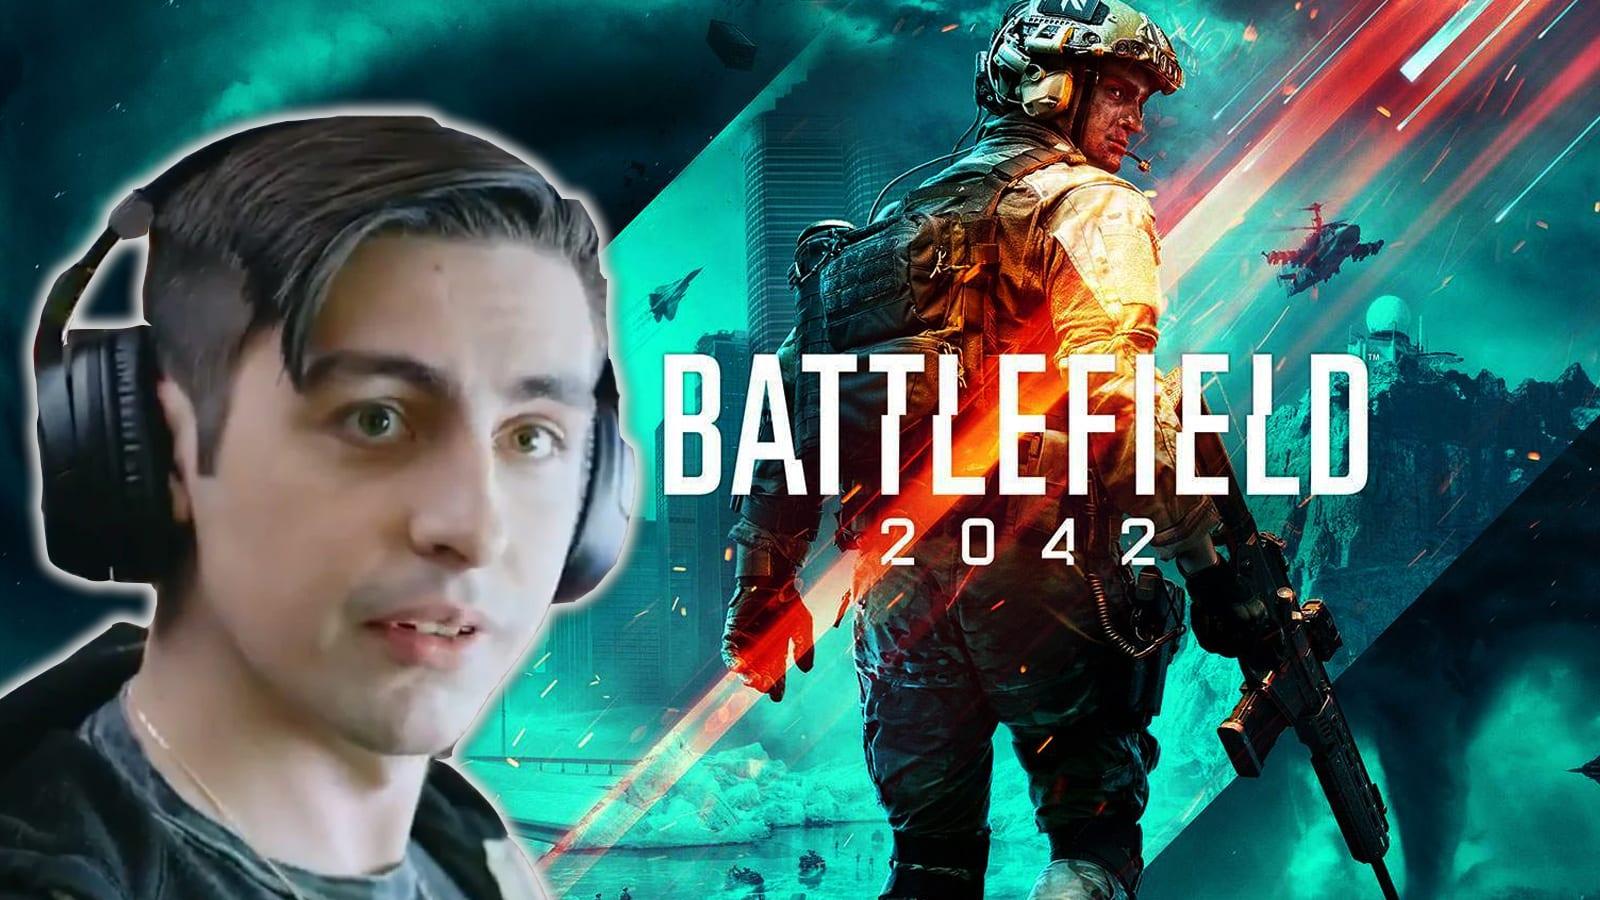 An image of Shroud and Battlefield 2042.